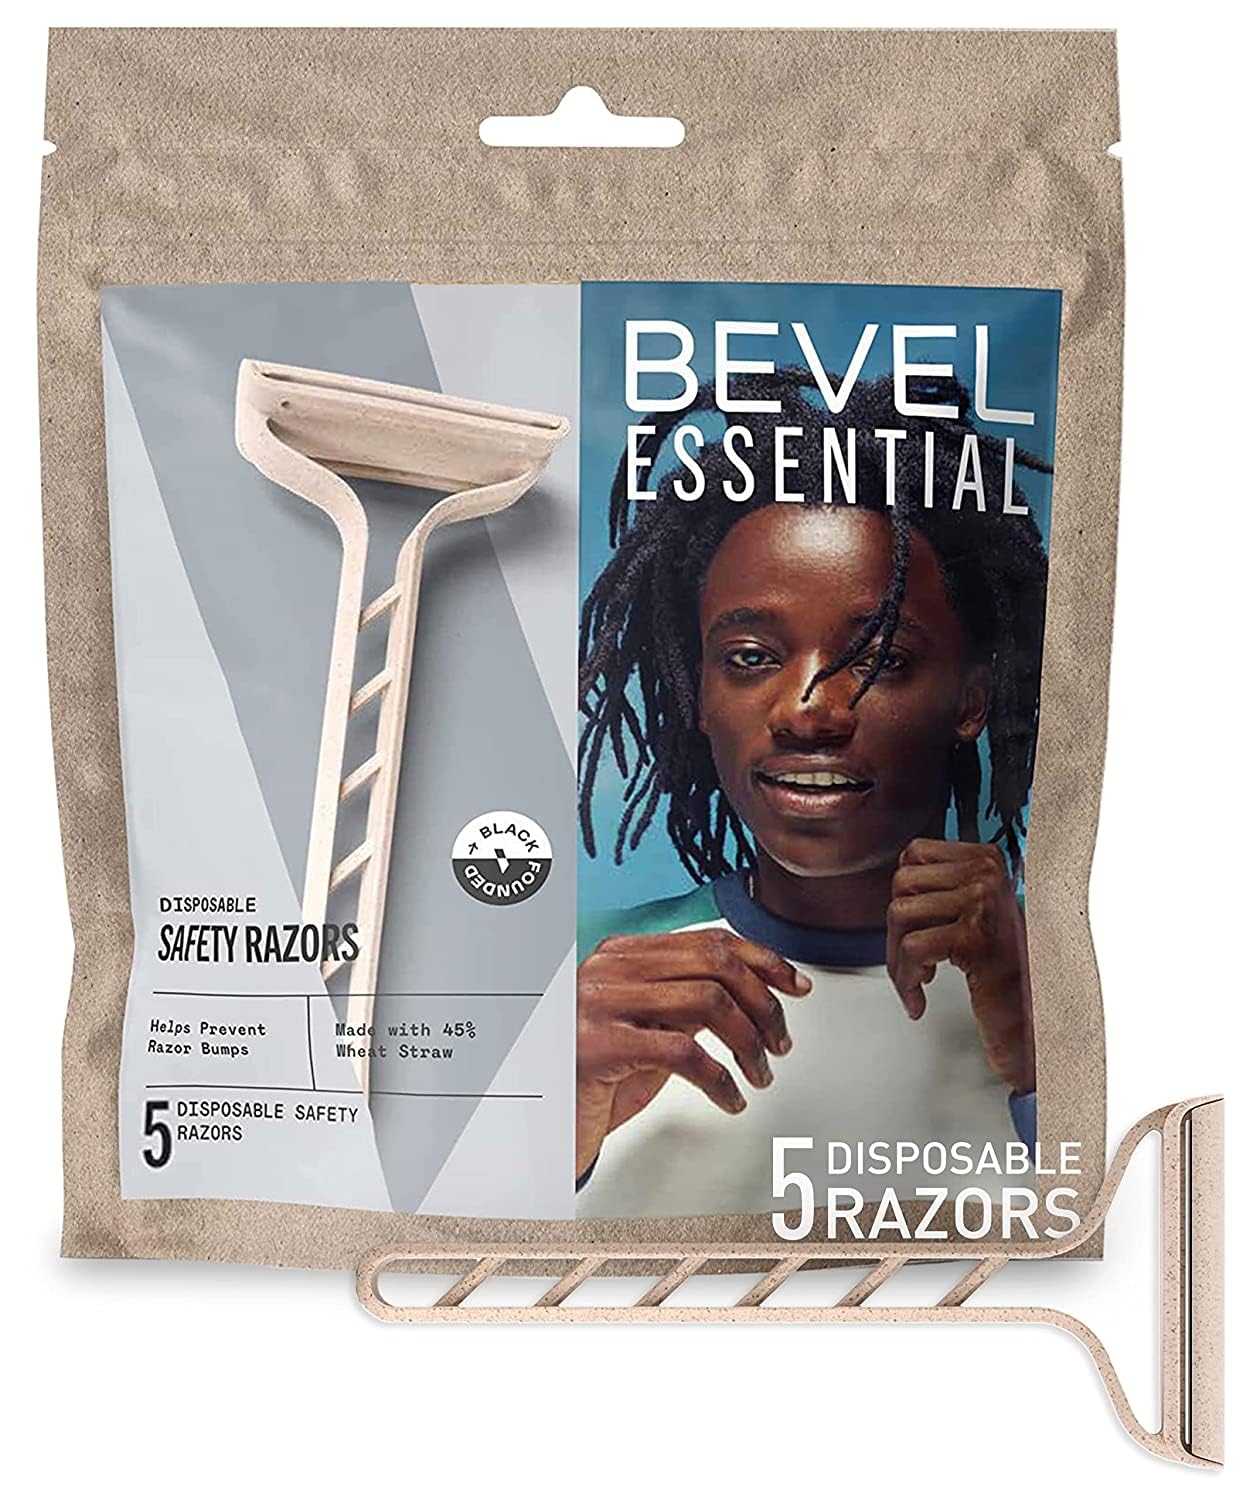 Bevel Essentials Disposable Safety Razors for Men, Double Edge Stainless Steel Blade Helps Prevent Nicks and Razor Bumps, Travel Essentials, 5 Count